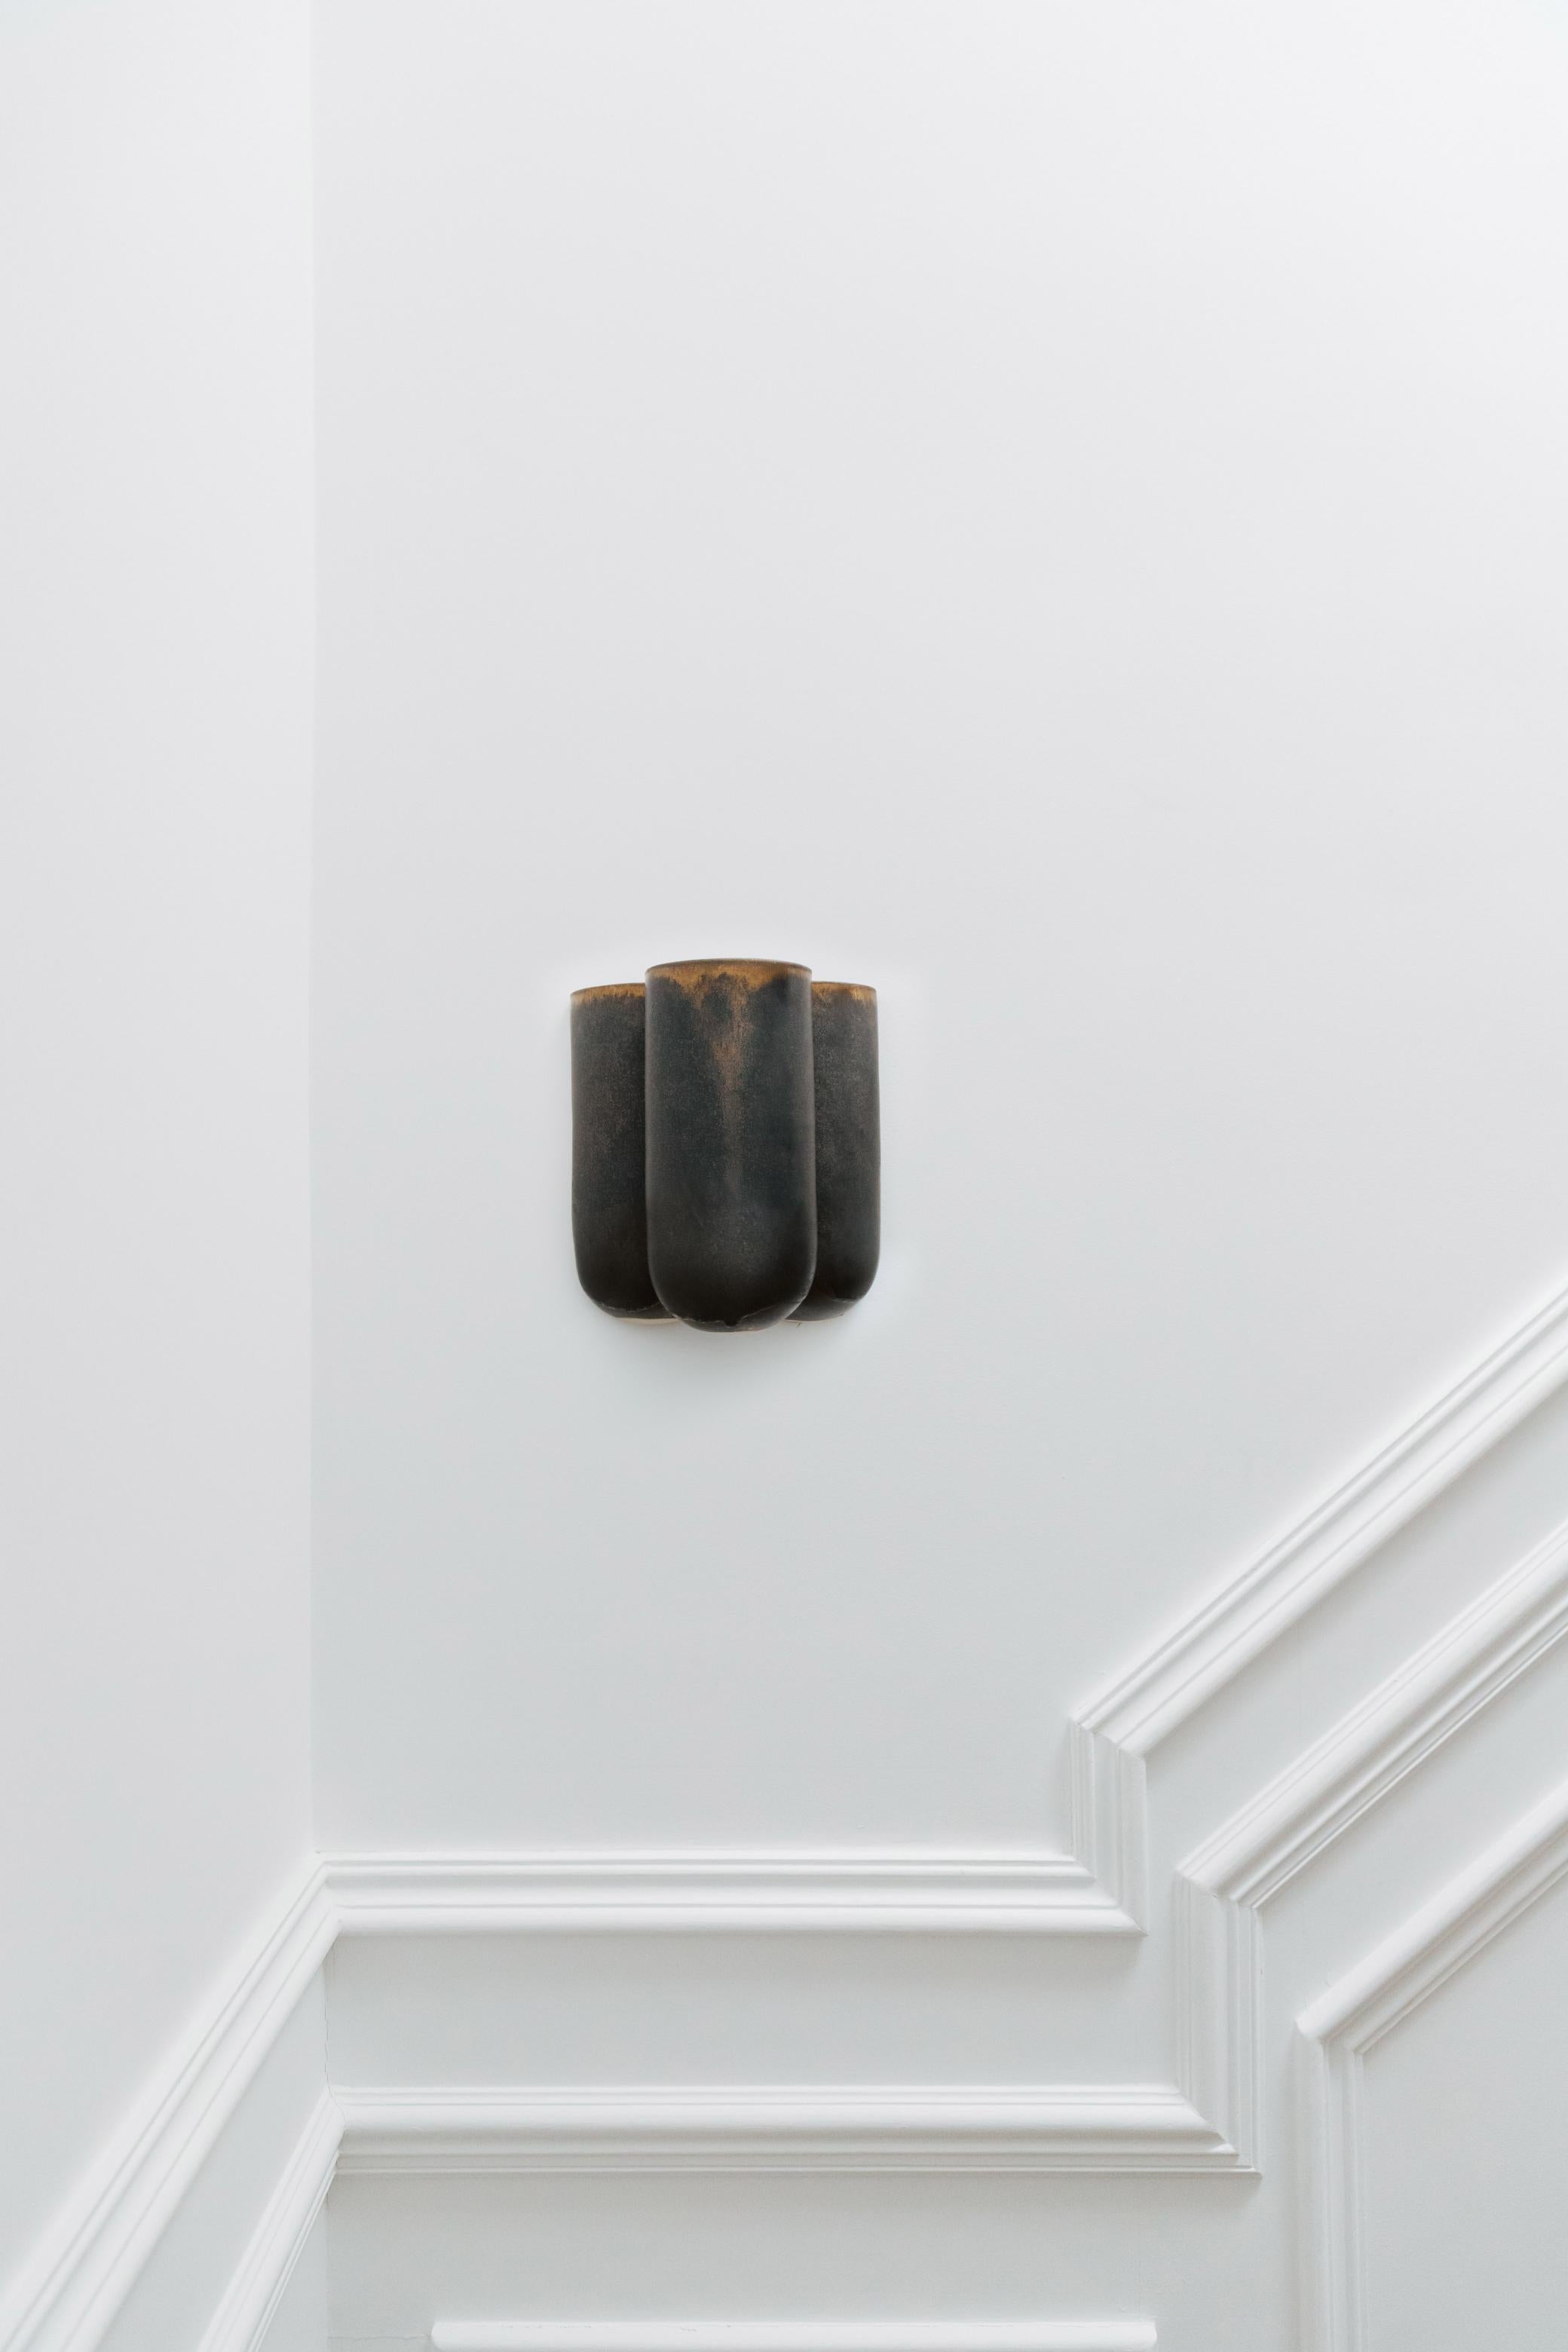 Other Plus Brillance Blackened Gold Wall Light by Lisa Allegra For Sale